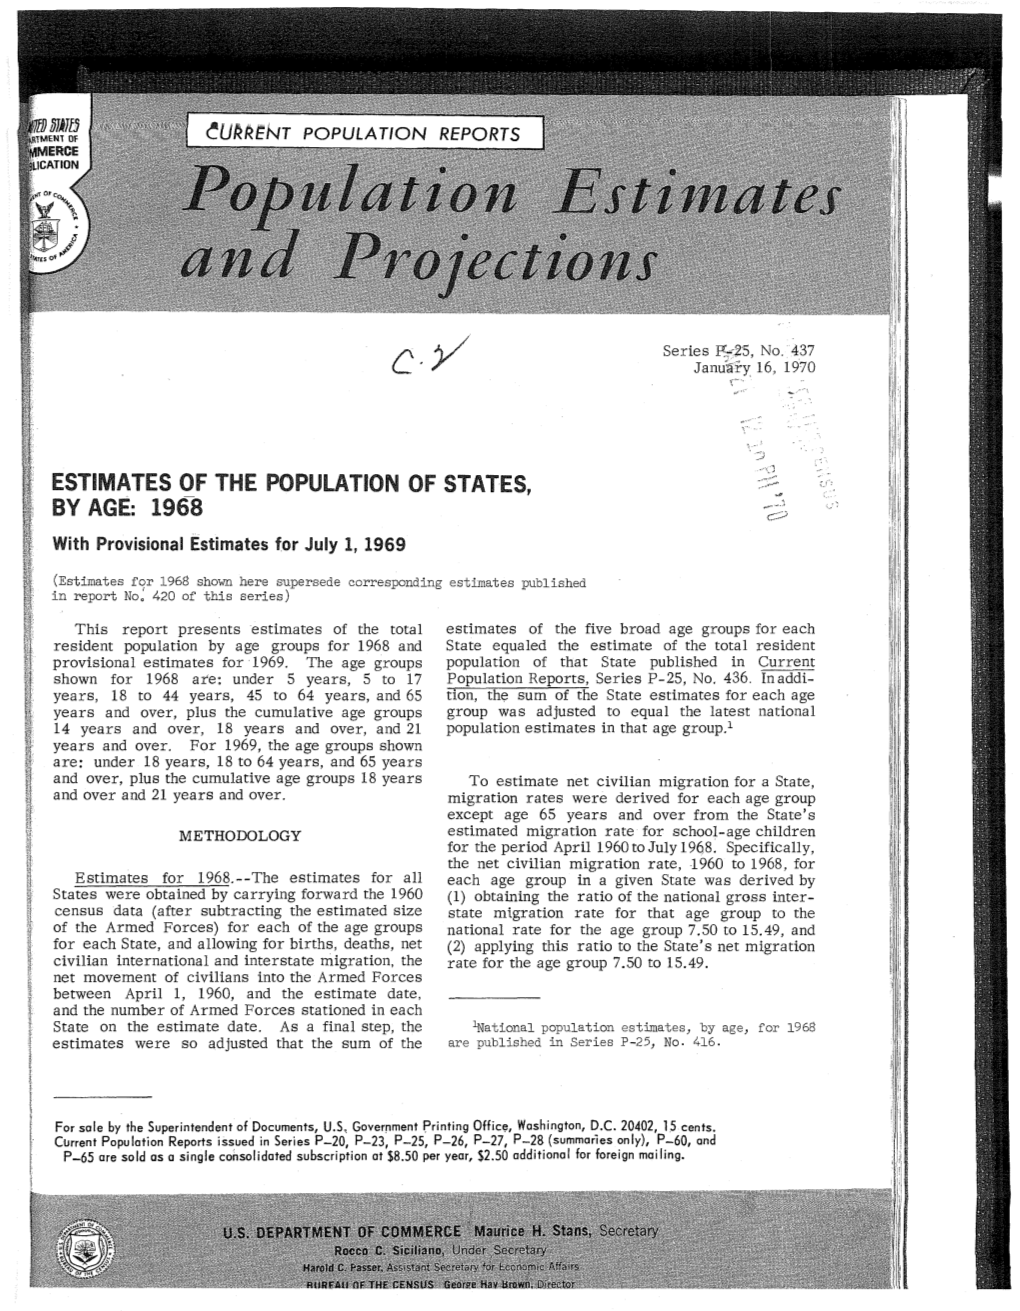 ESTIMATES of the POPULATION of STATES, by AGE: 196-8 with Provisional Estimates for July 1, 1969